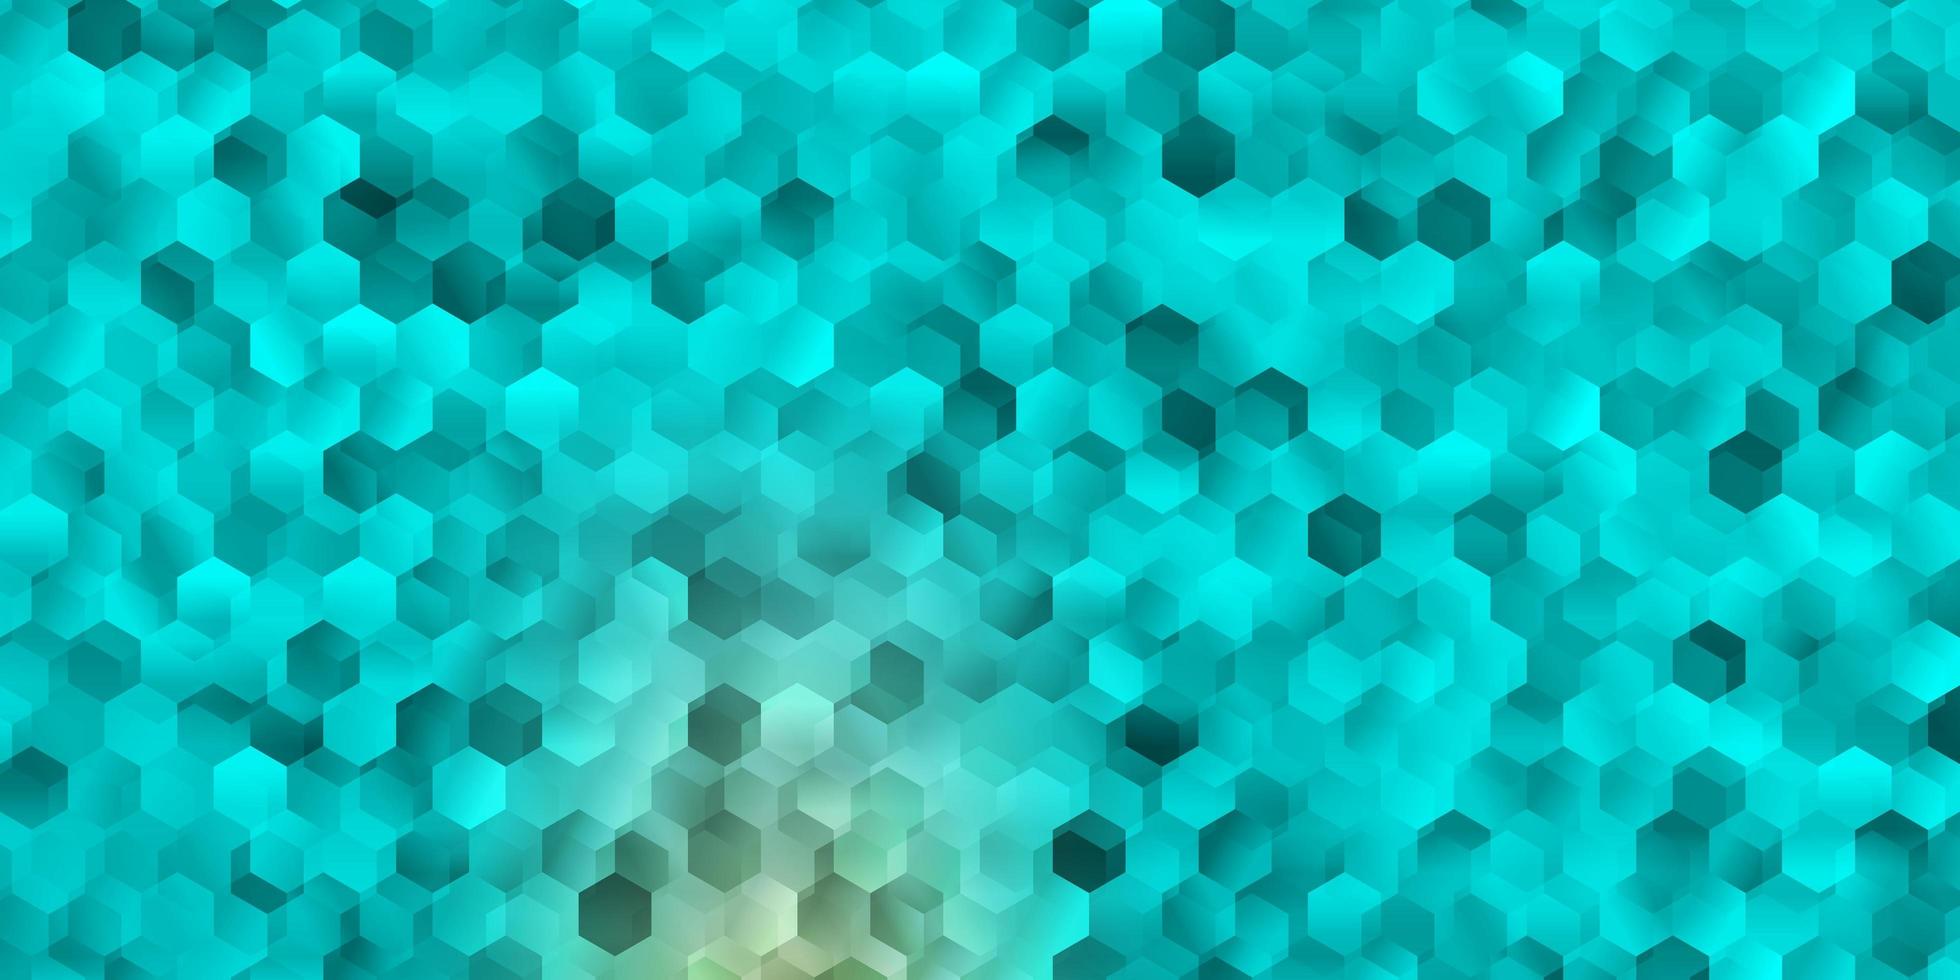 Light blue, green vector background with hexagonal shapes.